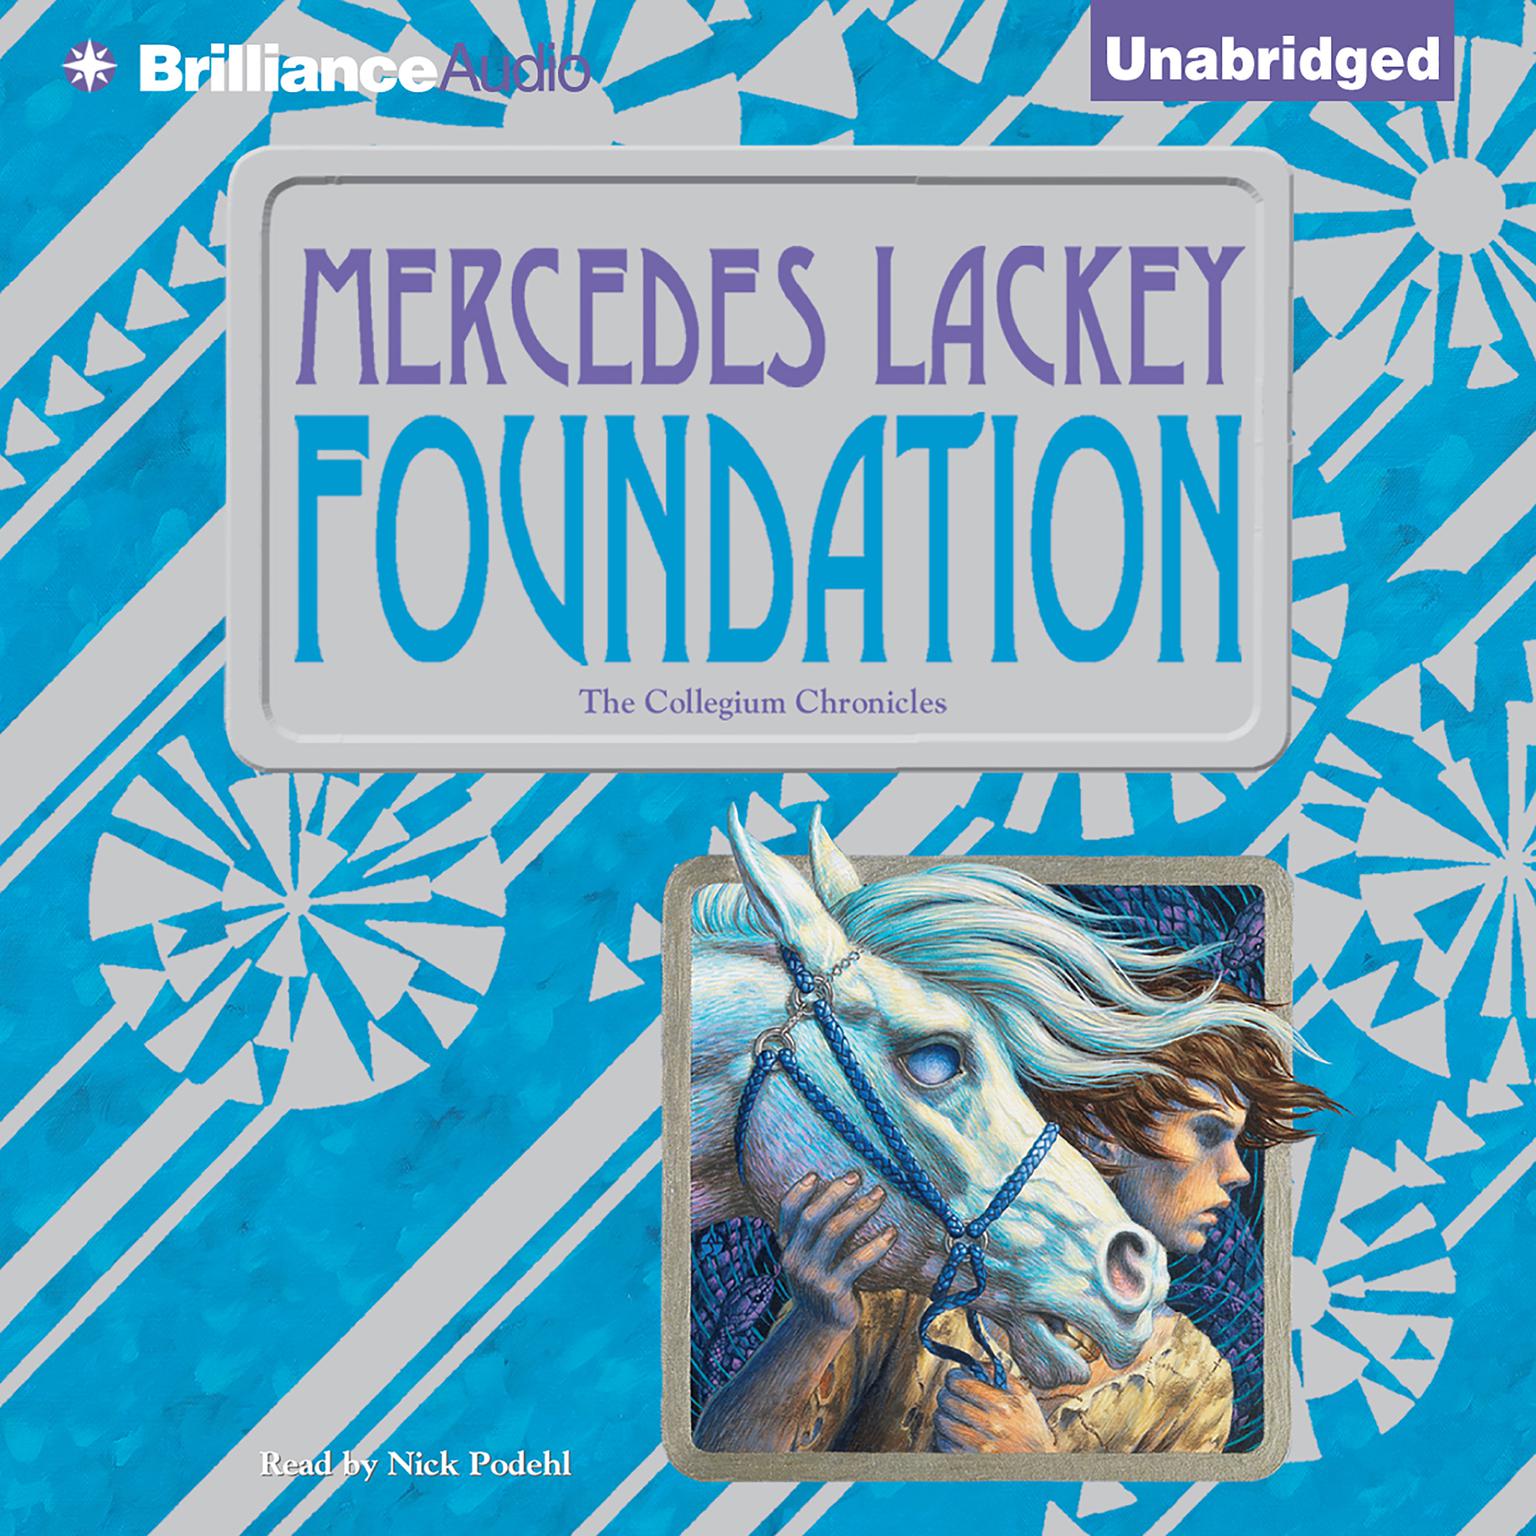 Foundation: The Collegium Chronicles Audiobook, by Mercedes Lackey